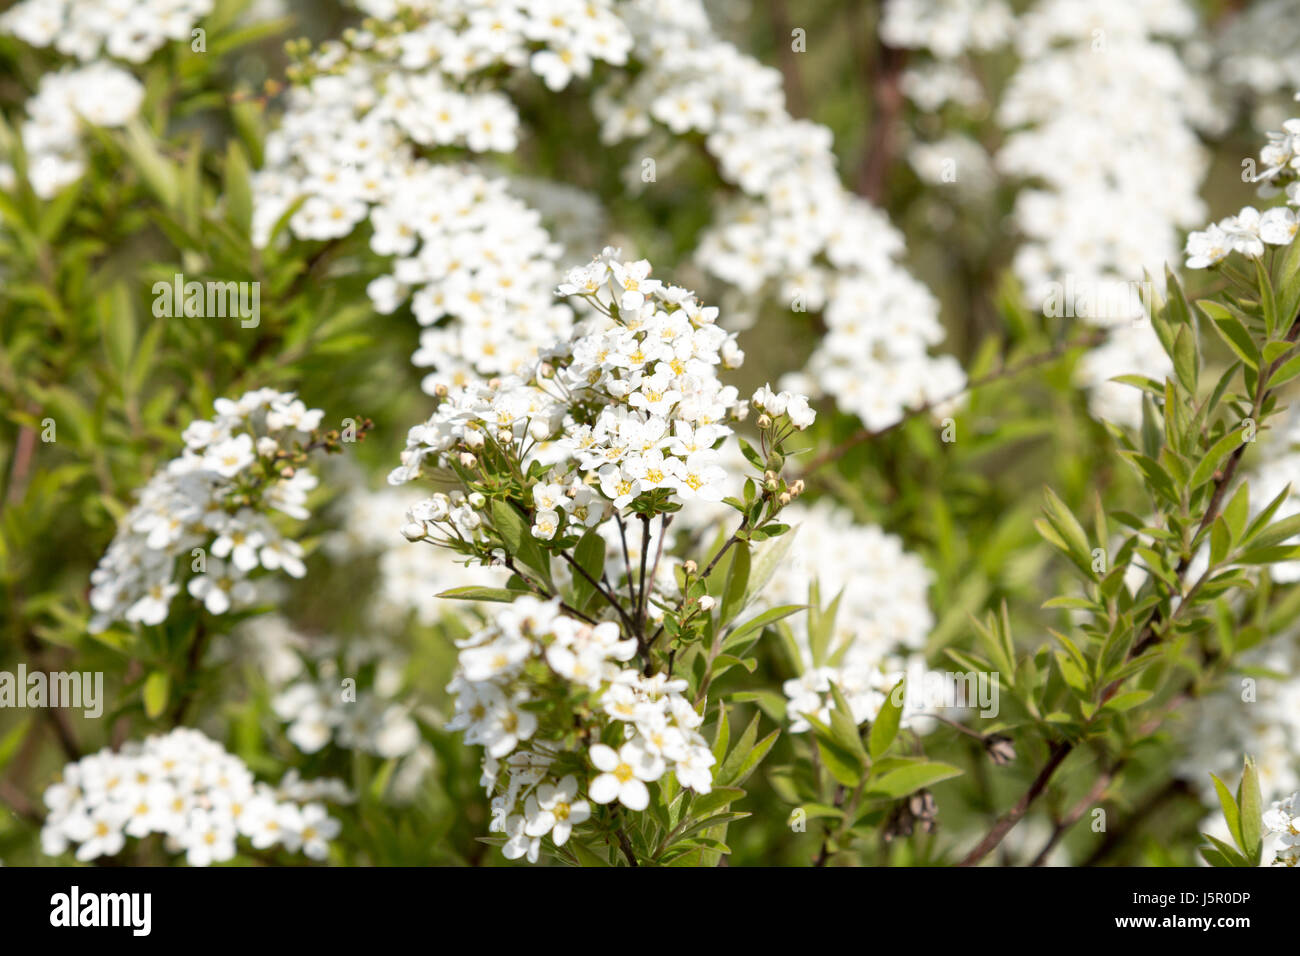 White flowering fresh jasmine flowers on a jasmine tree with green leaves in summer Stock Photo